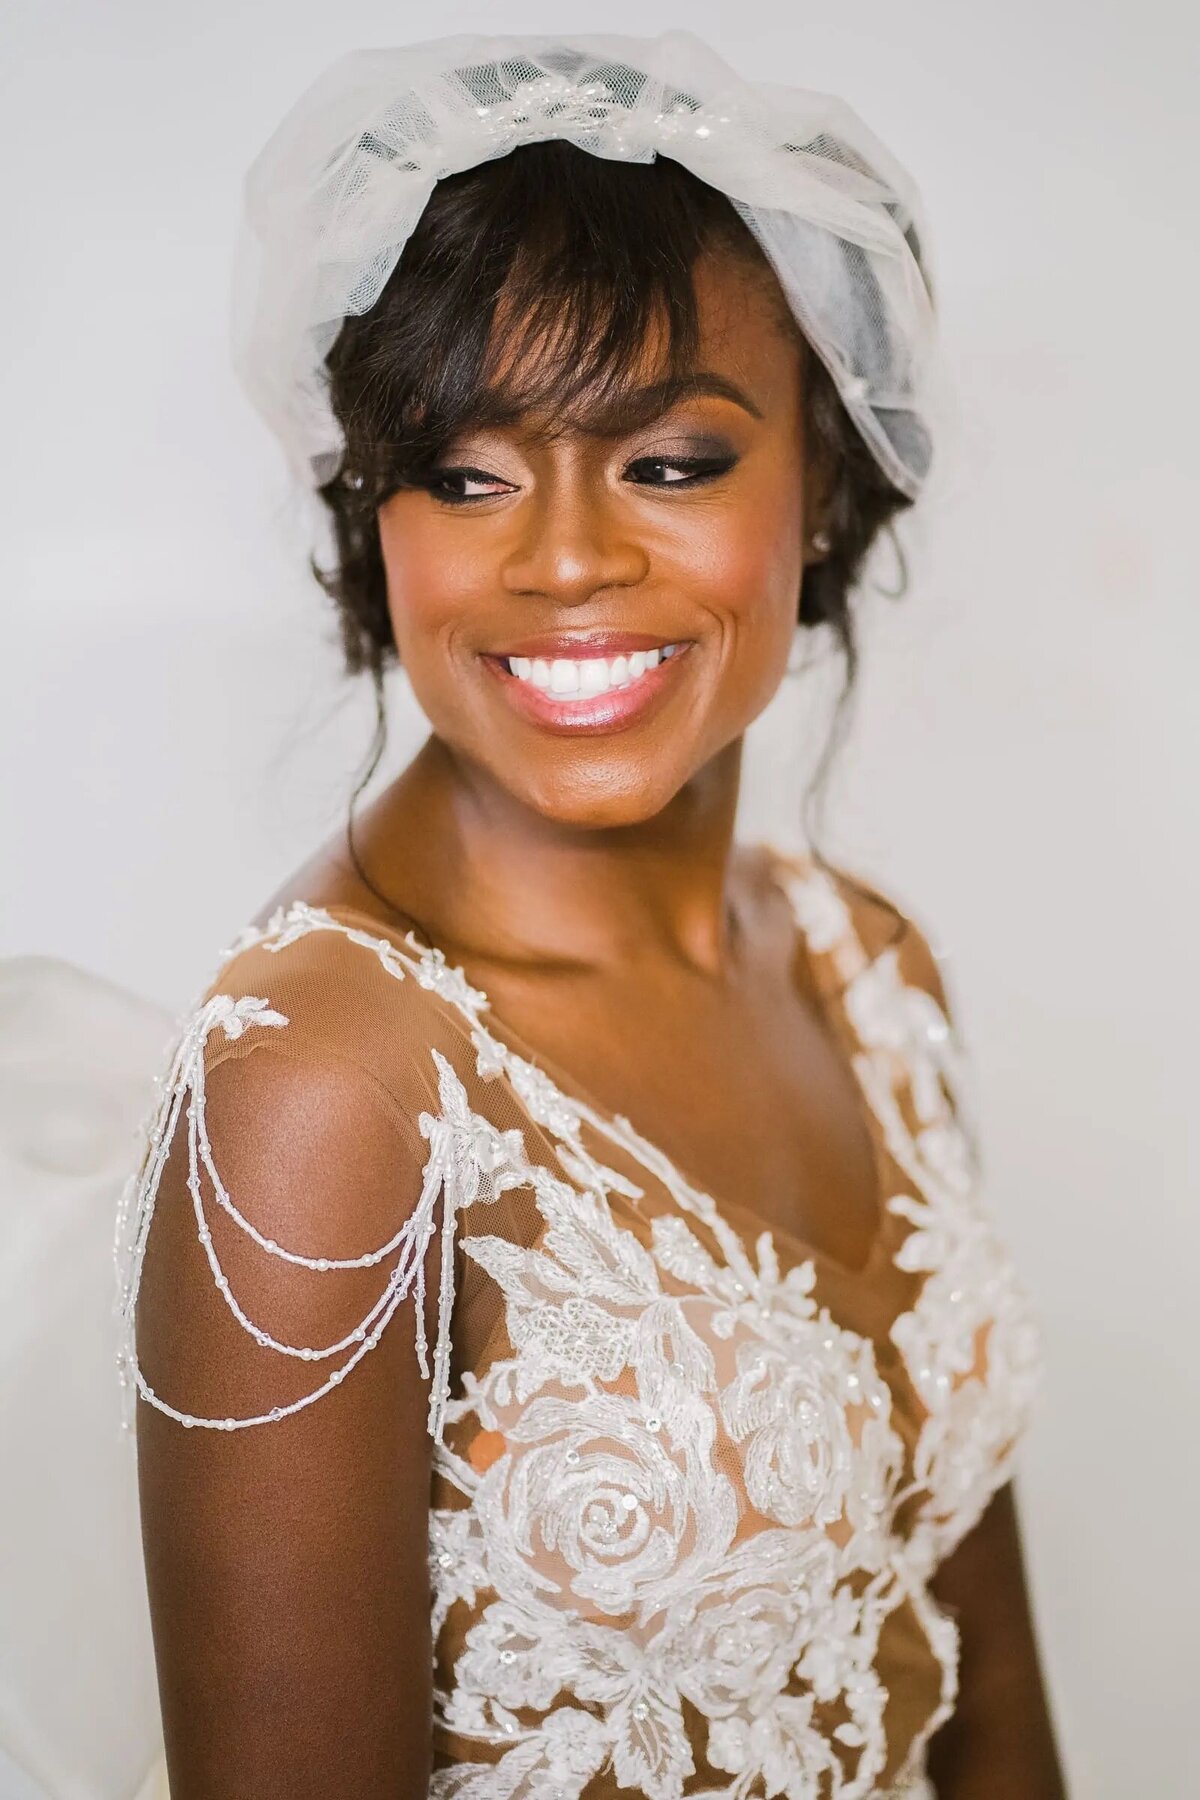 A bride smiling and looking over her shoulder